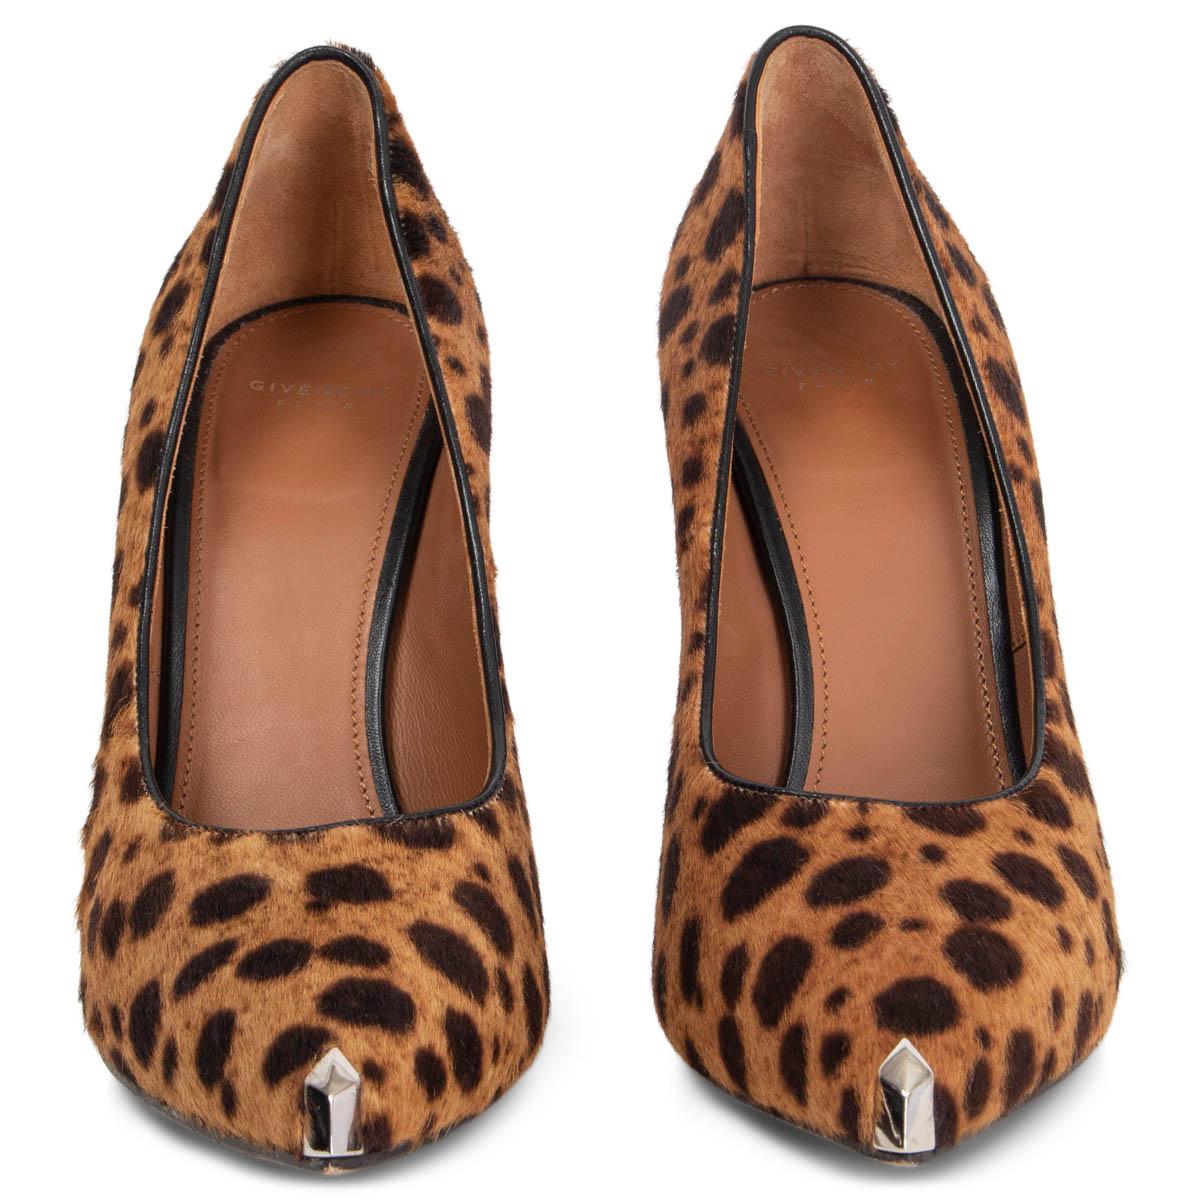 100% authentic Givenchy pointed-toe pumps in caramel and dark brown cheetah print calf hair with a black calfskin heel. Silver-tone metal tip. Have been worn and are in excellent condition. 

Measurements
Imprinted Size	37.5
Shoe Size	37.5
Inside